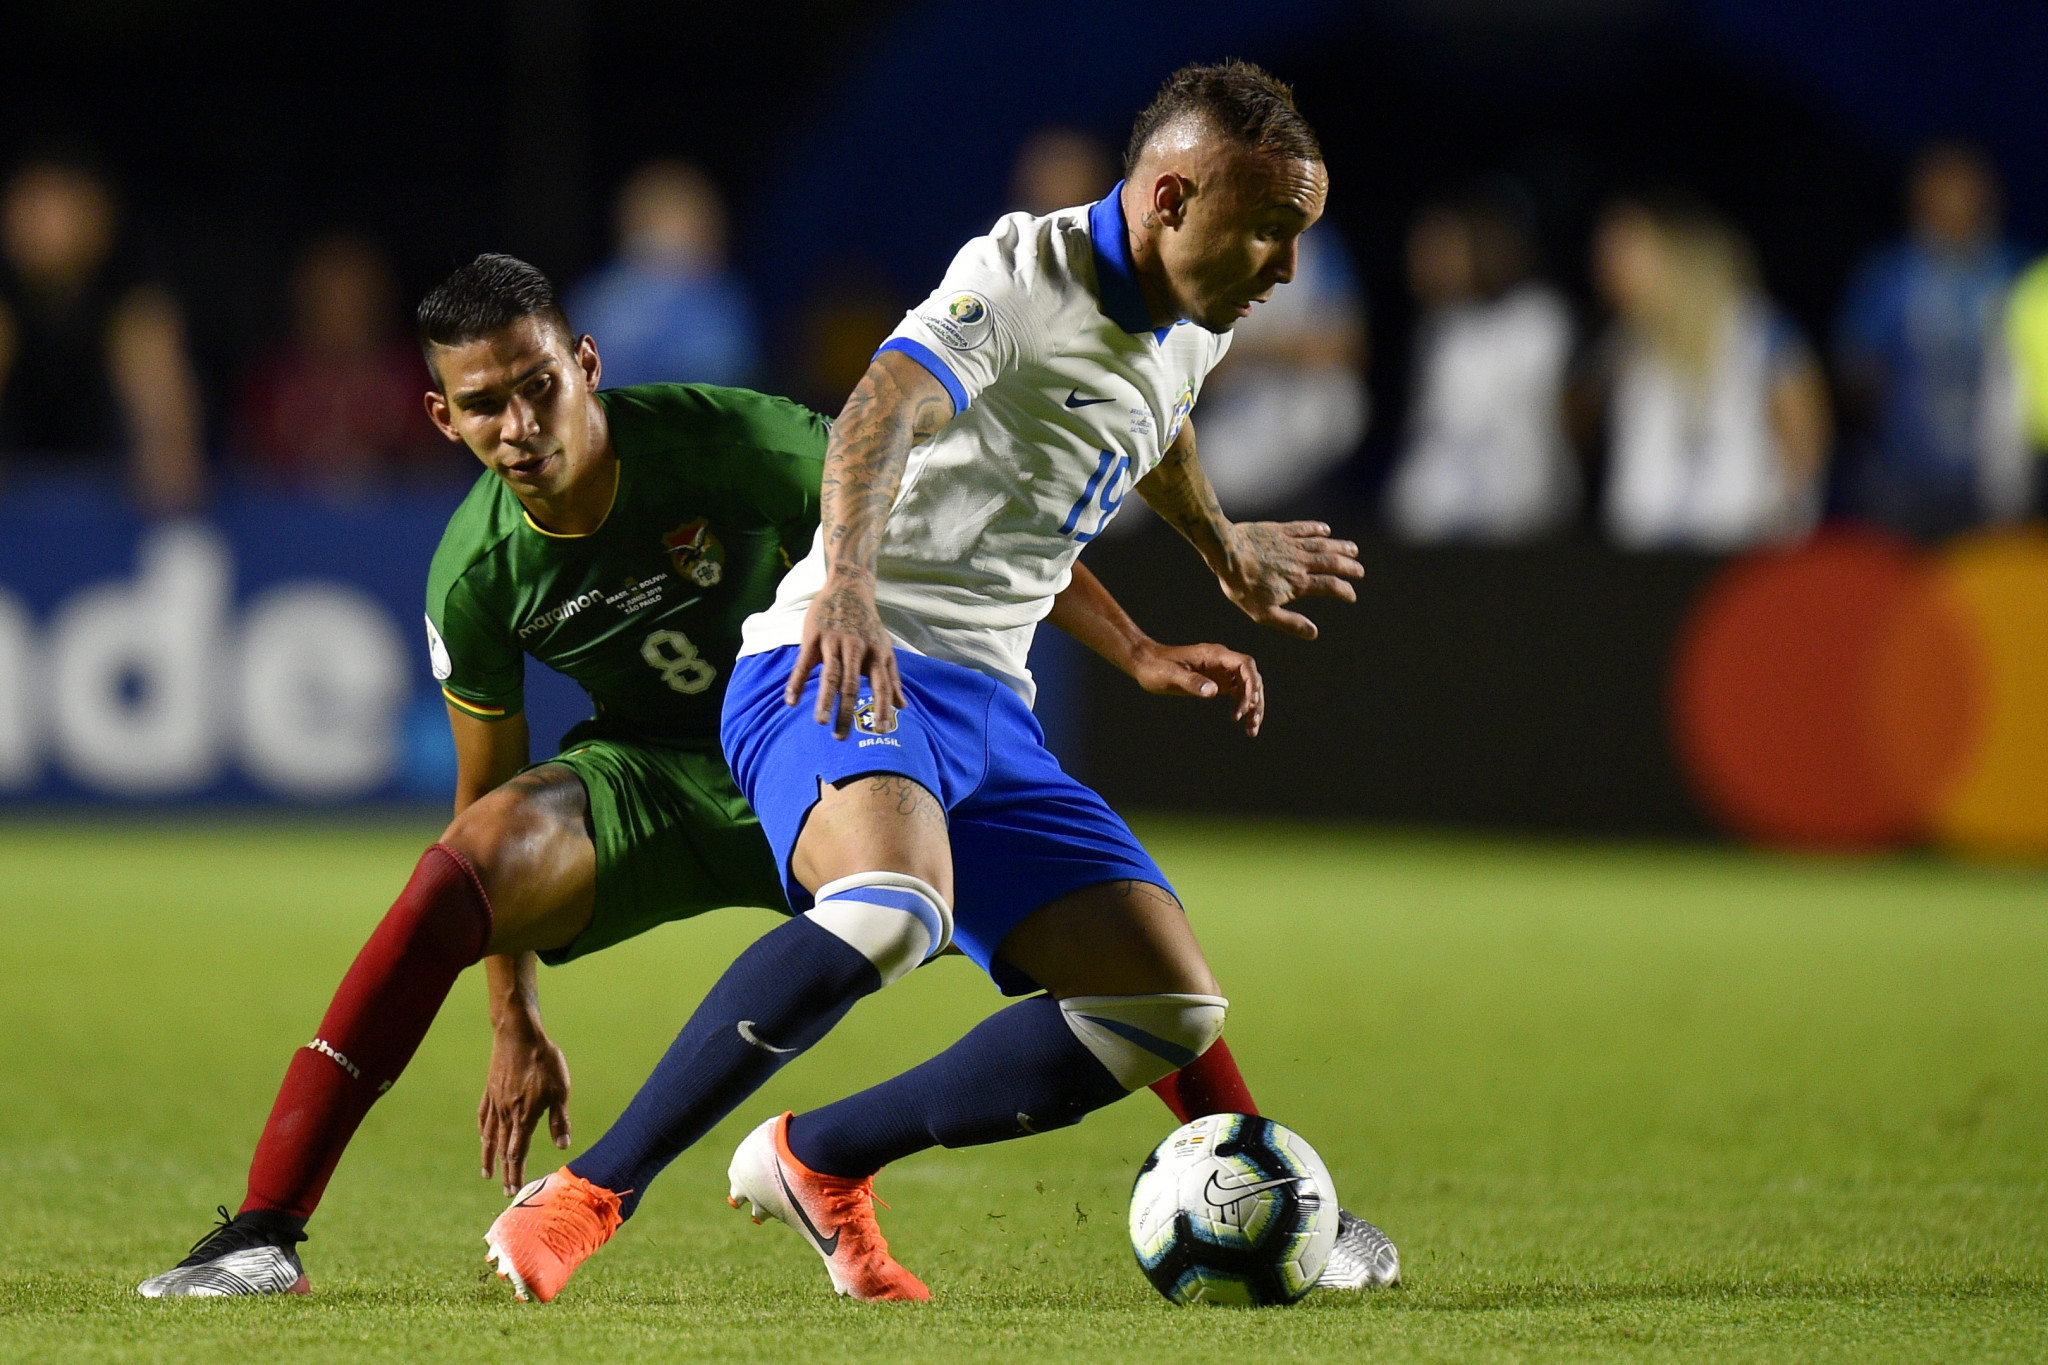 Everton Soares scored the third goal in Brazil's 3-0 victory against Bolivia in the Copa America ©Getty Images